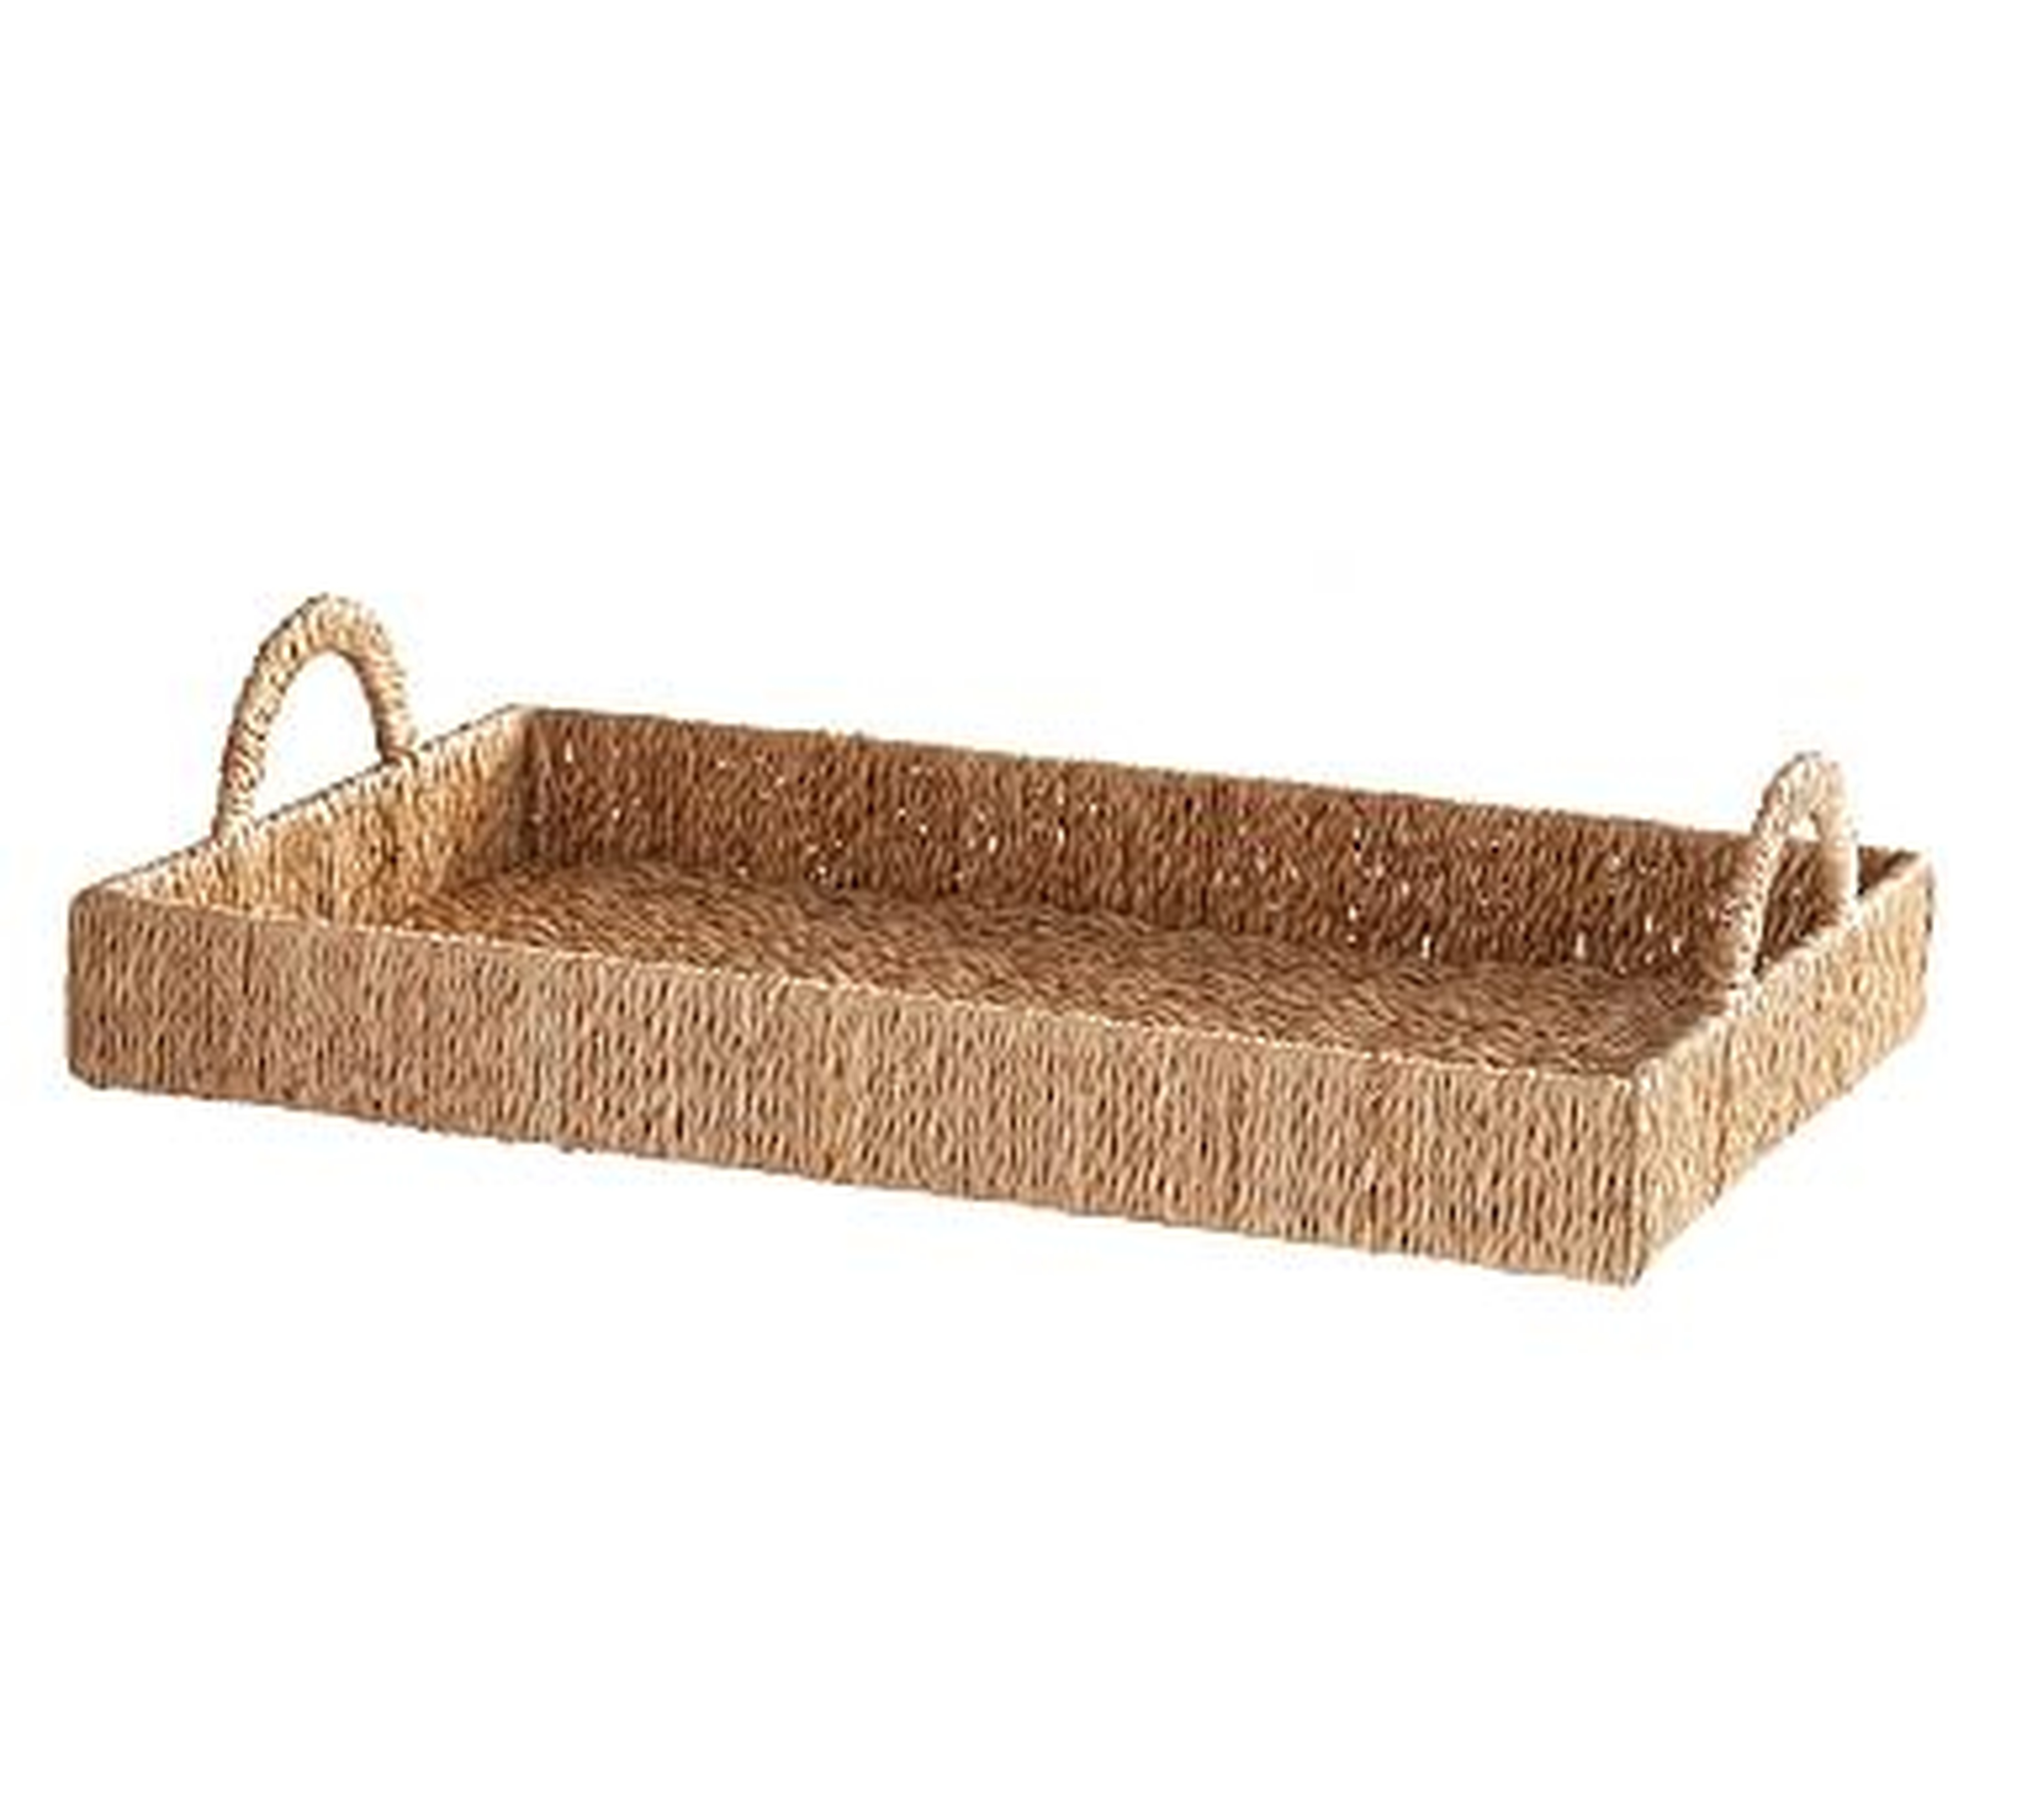 Seagrass Serving Tray - Pottery Barn